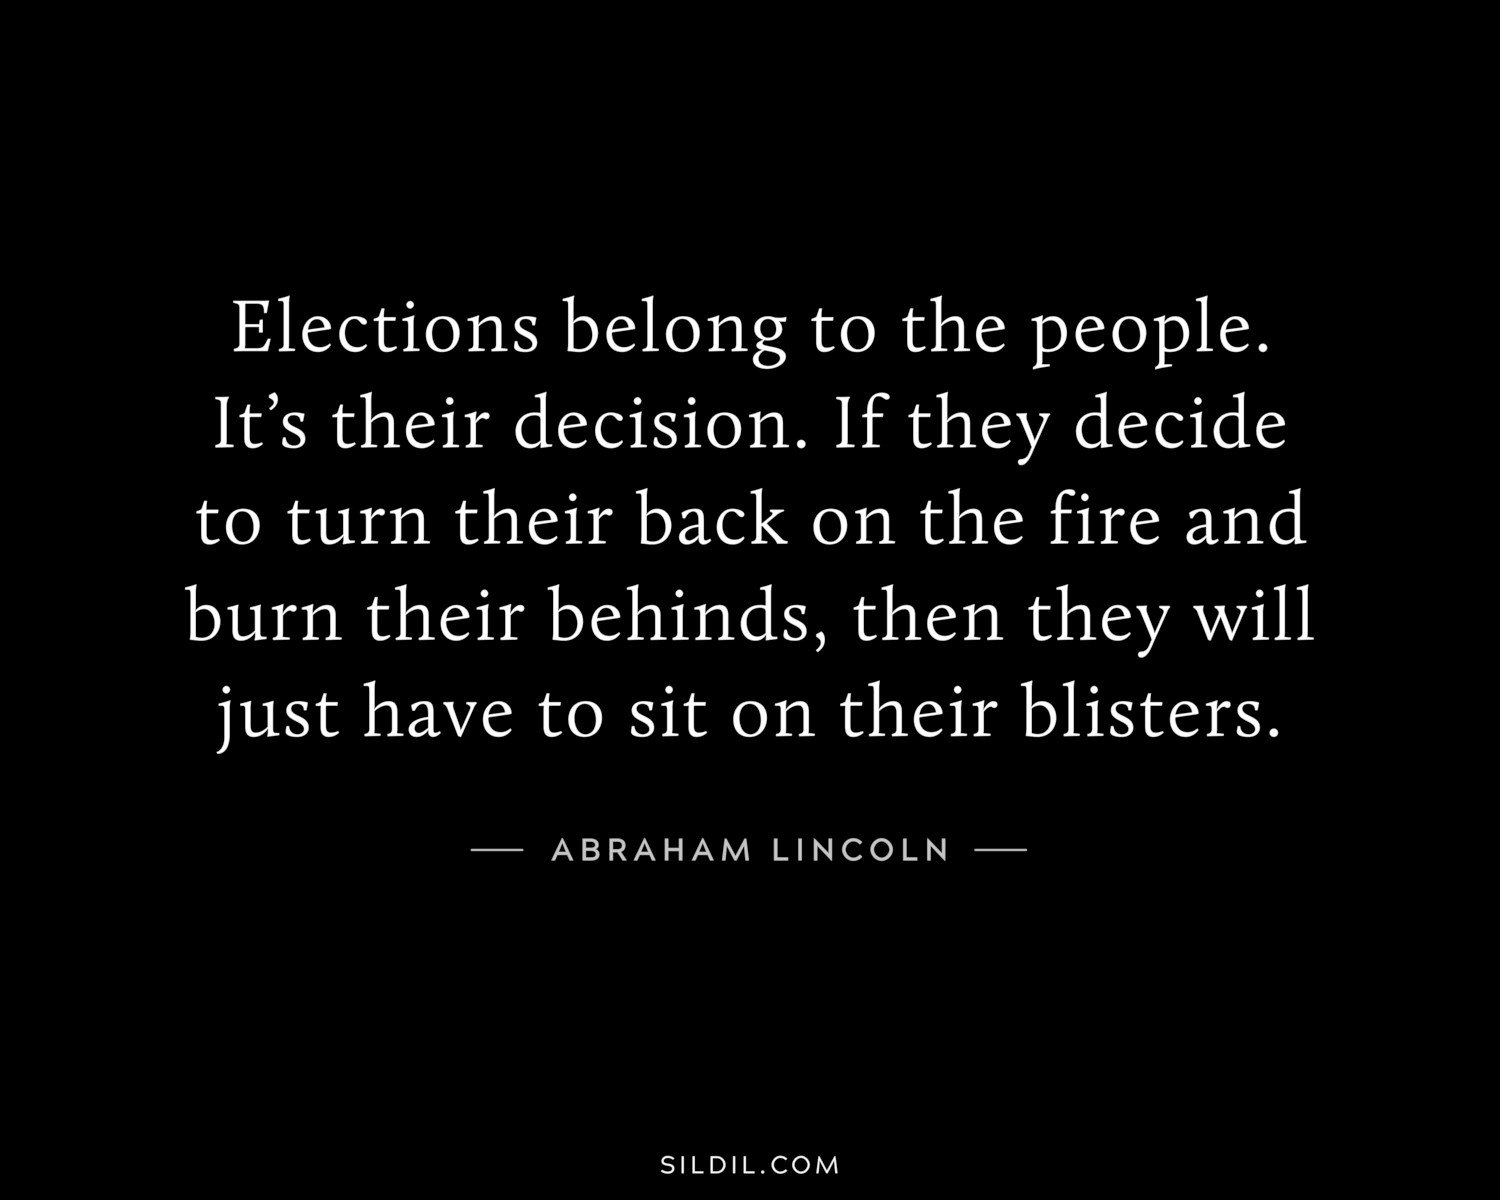 Elections belong to the people. It’s their decision. If they decide to turn their back on the fire and burn their behinds, then they will just have to sit on their blisters.